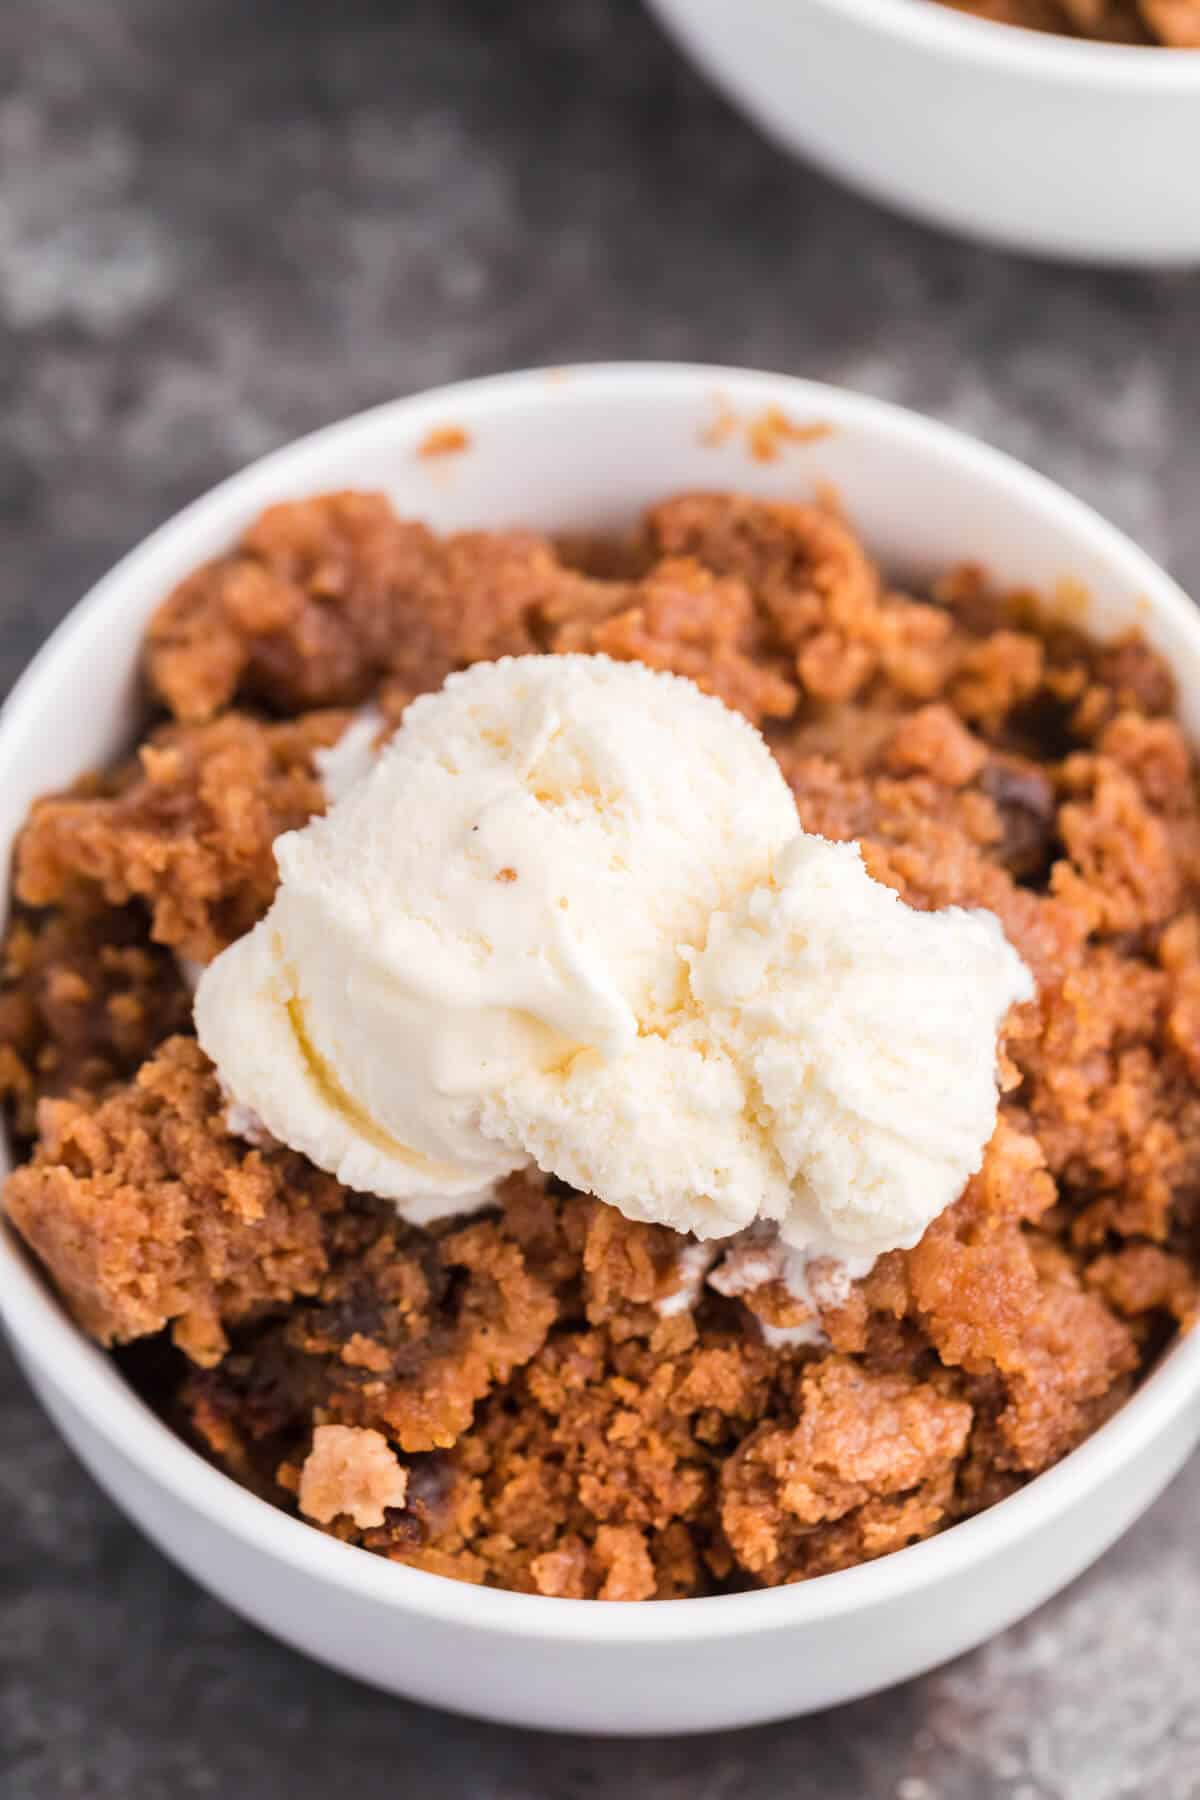 Slow Cooker Pumpkin Dump Cake - This is the easiest fall dessert! Your family will beg for this Crockpot dessert recipe made with boxed cake mix all year long.